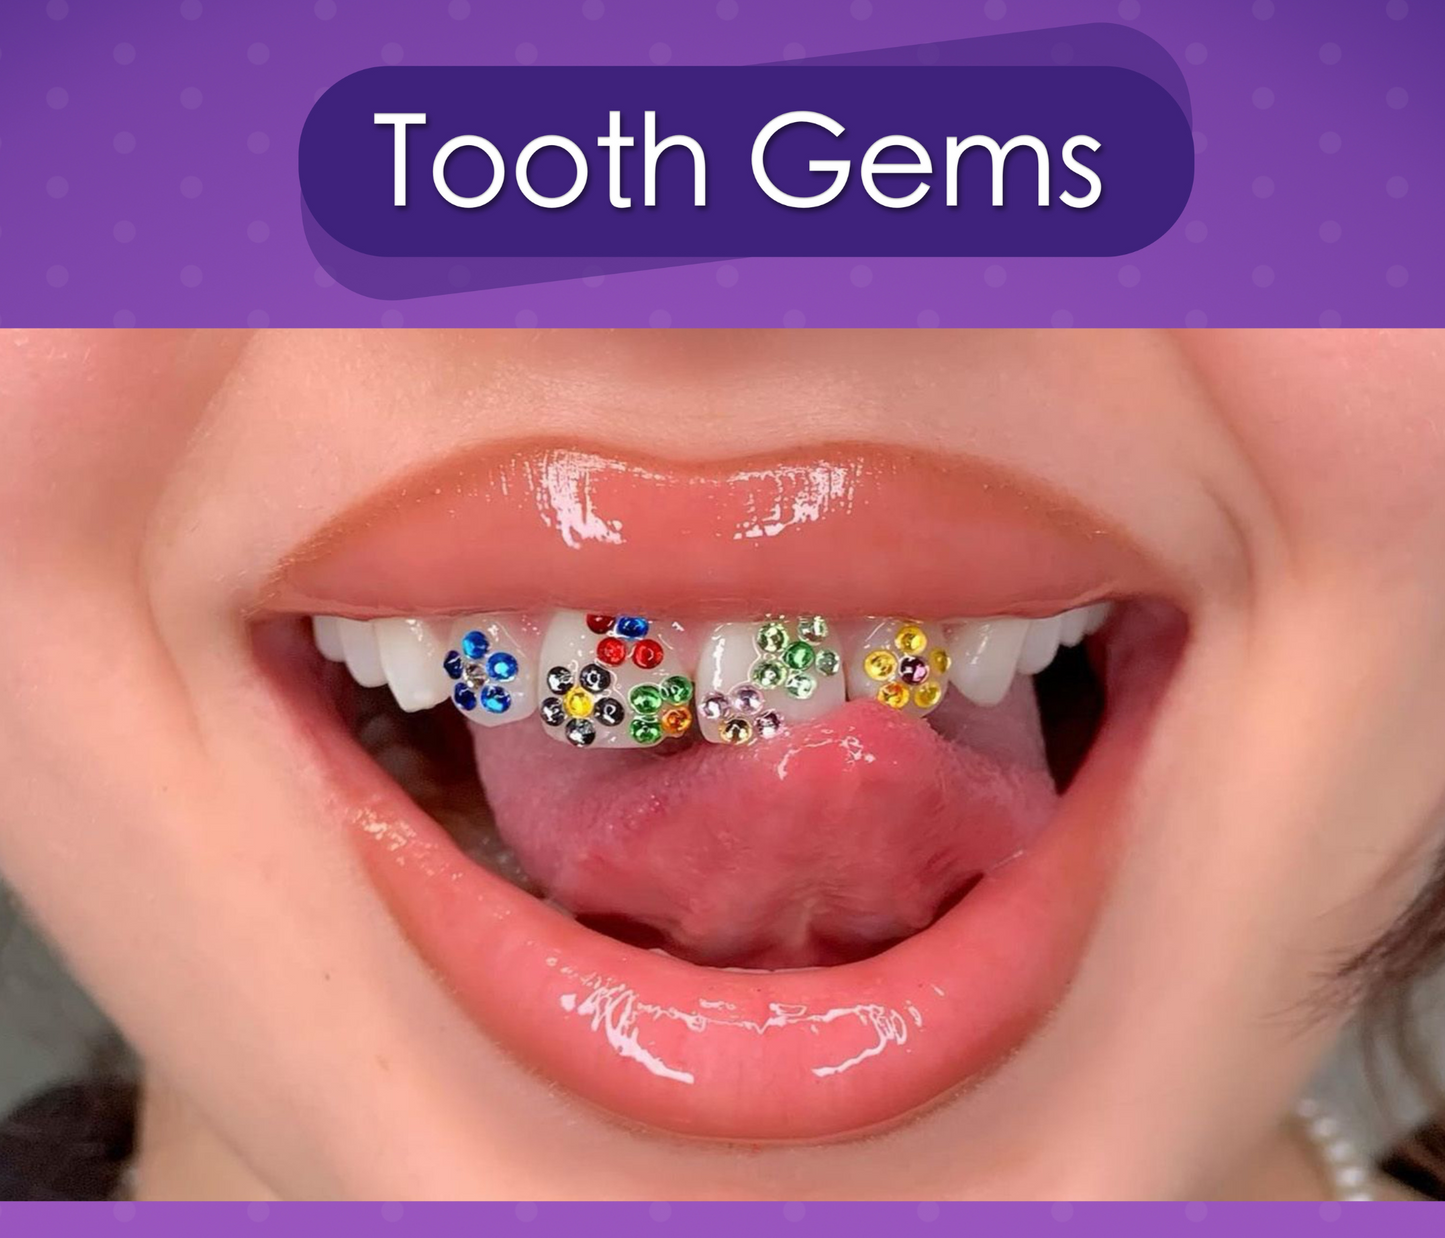 Orthodontic Braces Adhesive - Tooth Gem glue - Light Cure - Permanent Tooth  Gem Flowable Composite for Dentist